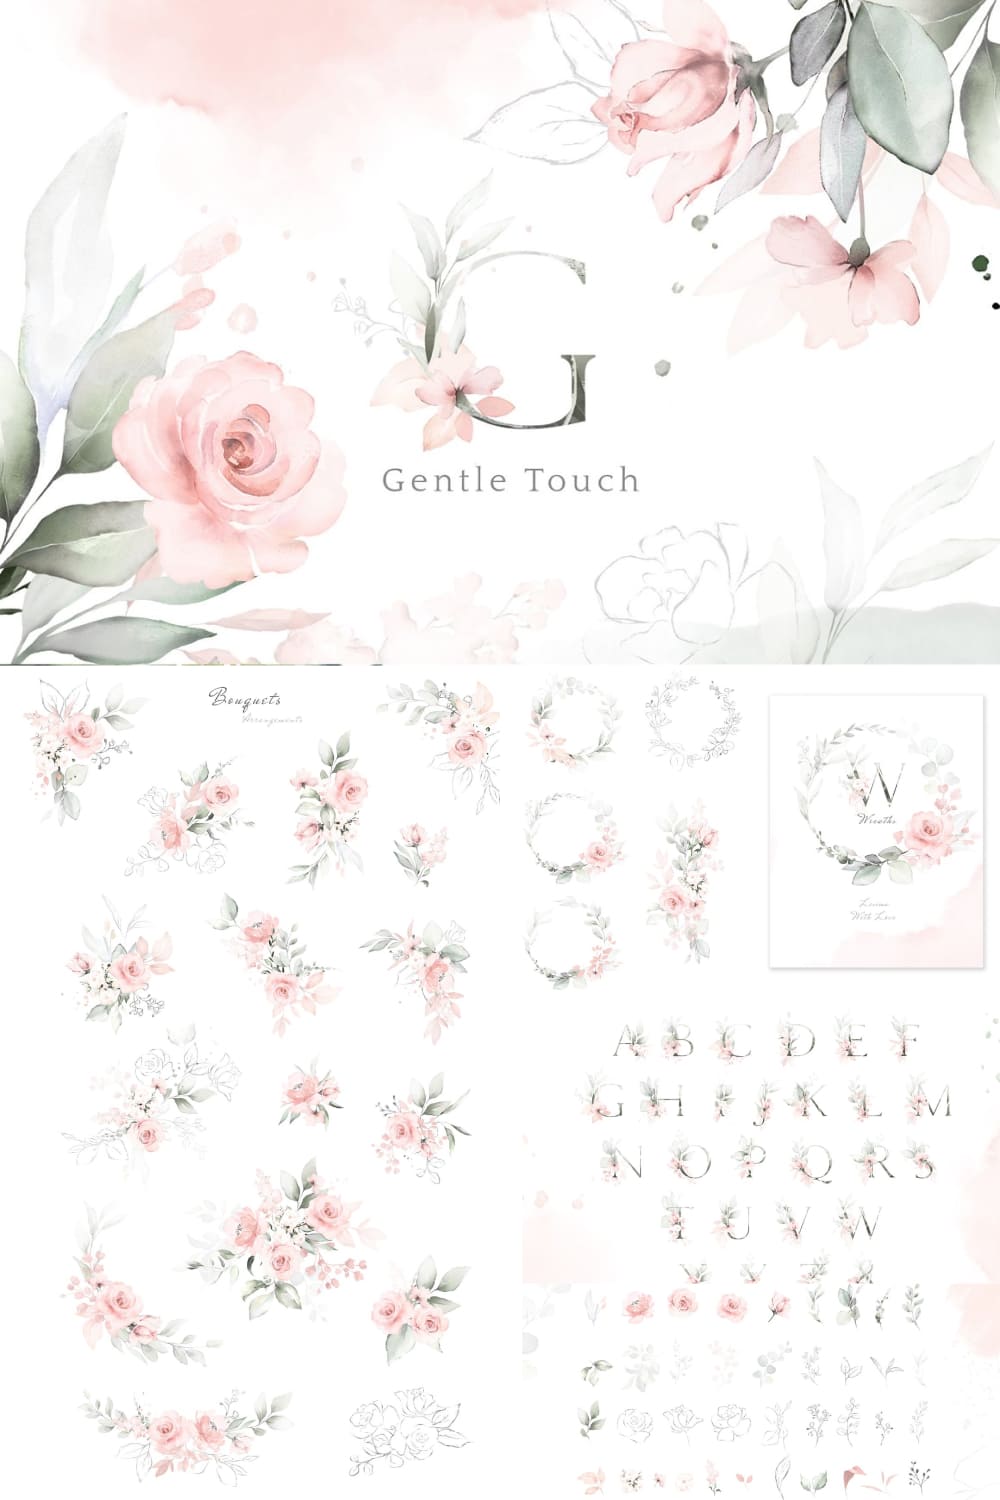 04 gentle touch watercolor collection 1000 1500